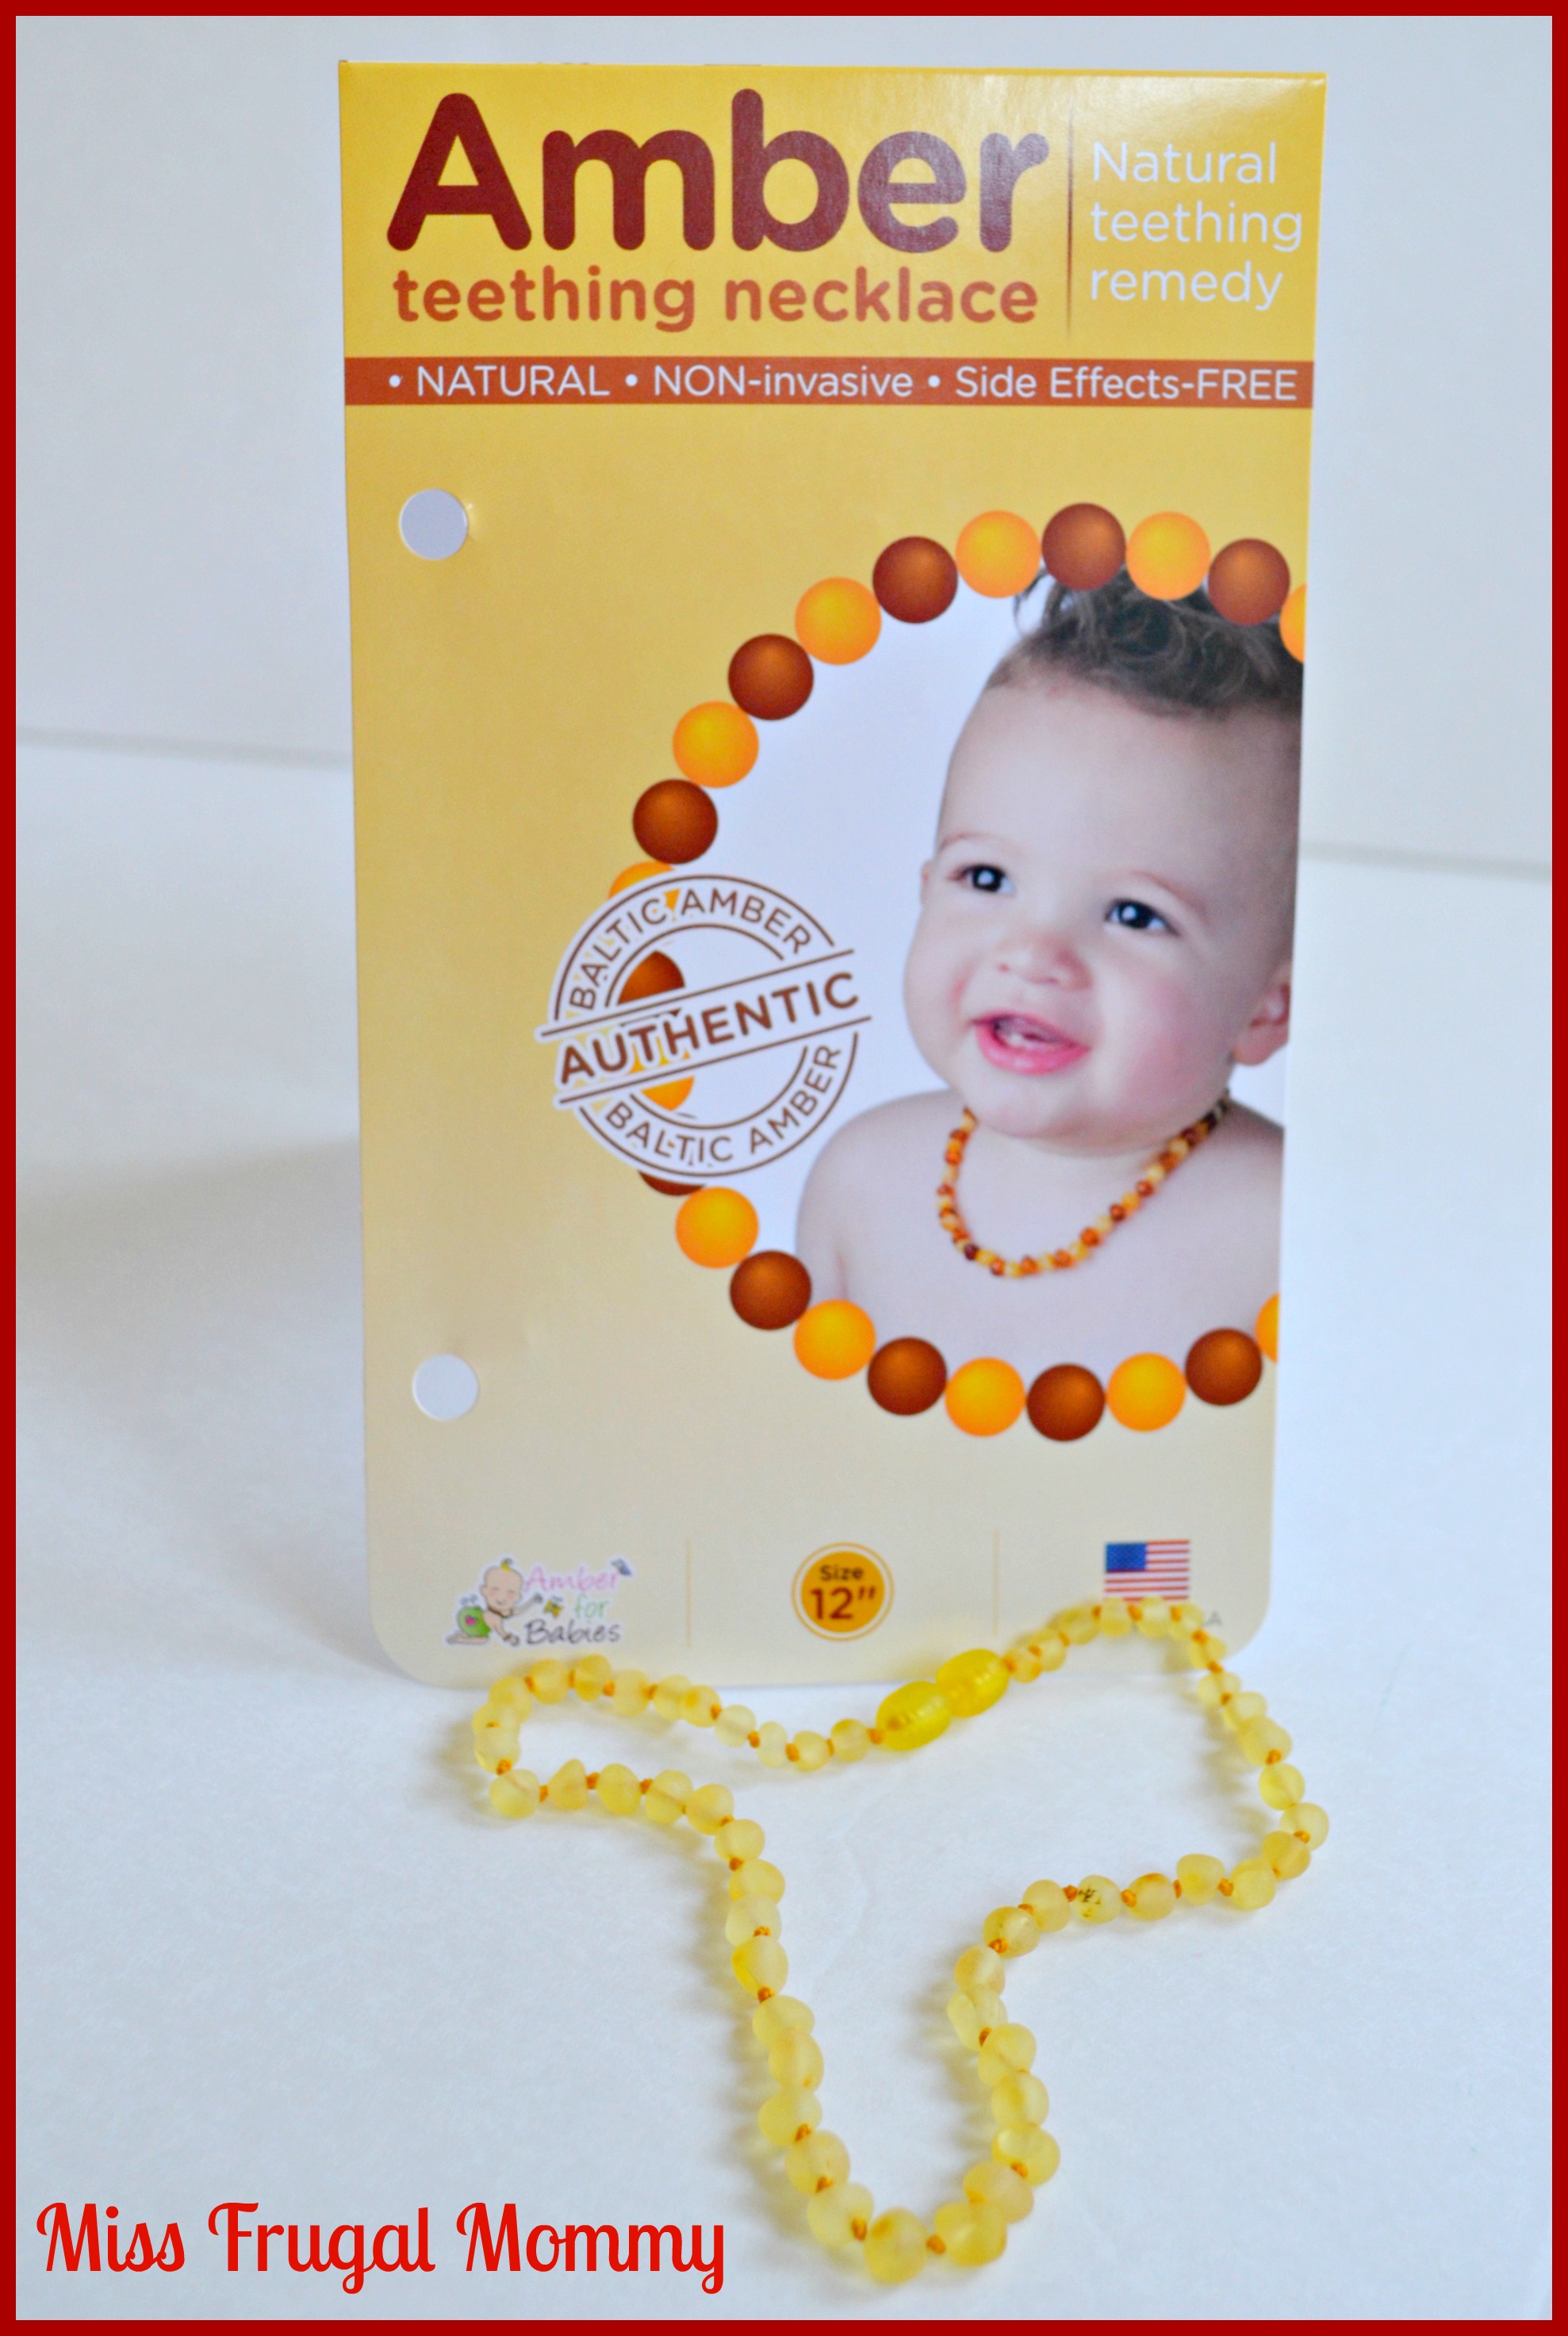 kids teething necklace for Sale OFF 76%